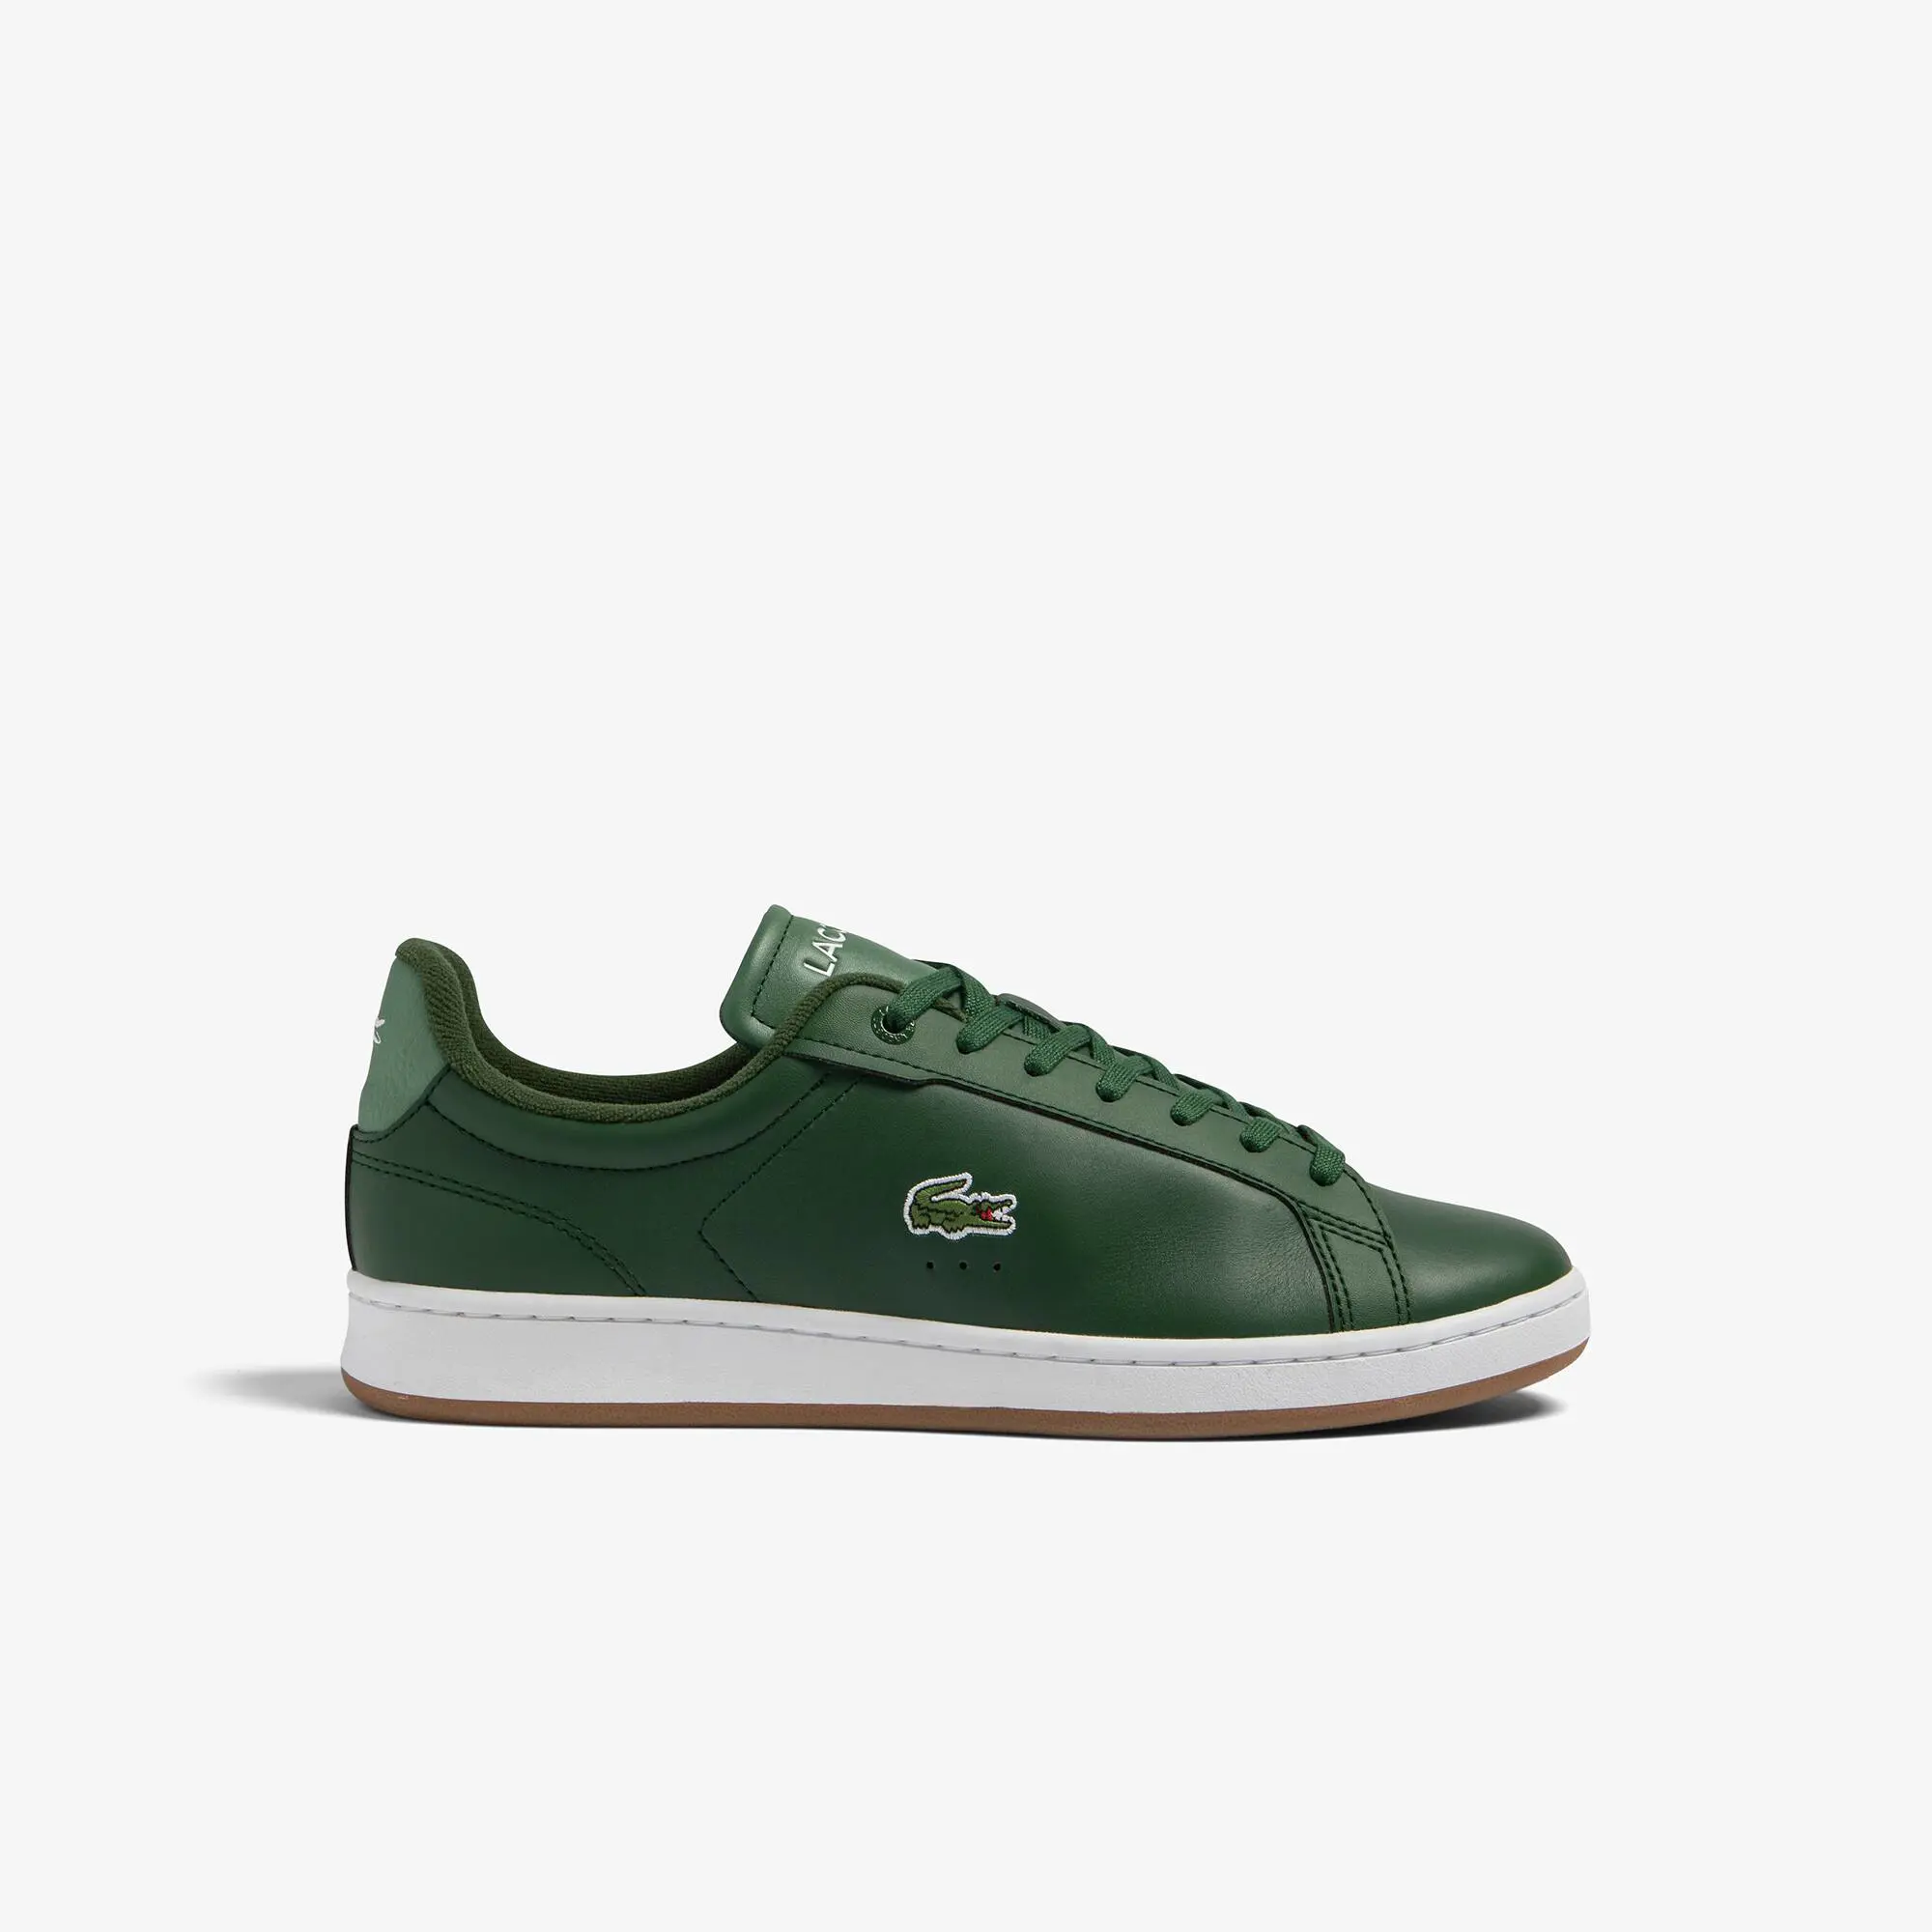 Lacoste Men's Carnaby Pro Leather Gum Sole Sneakers. 1